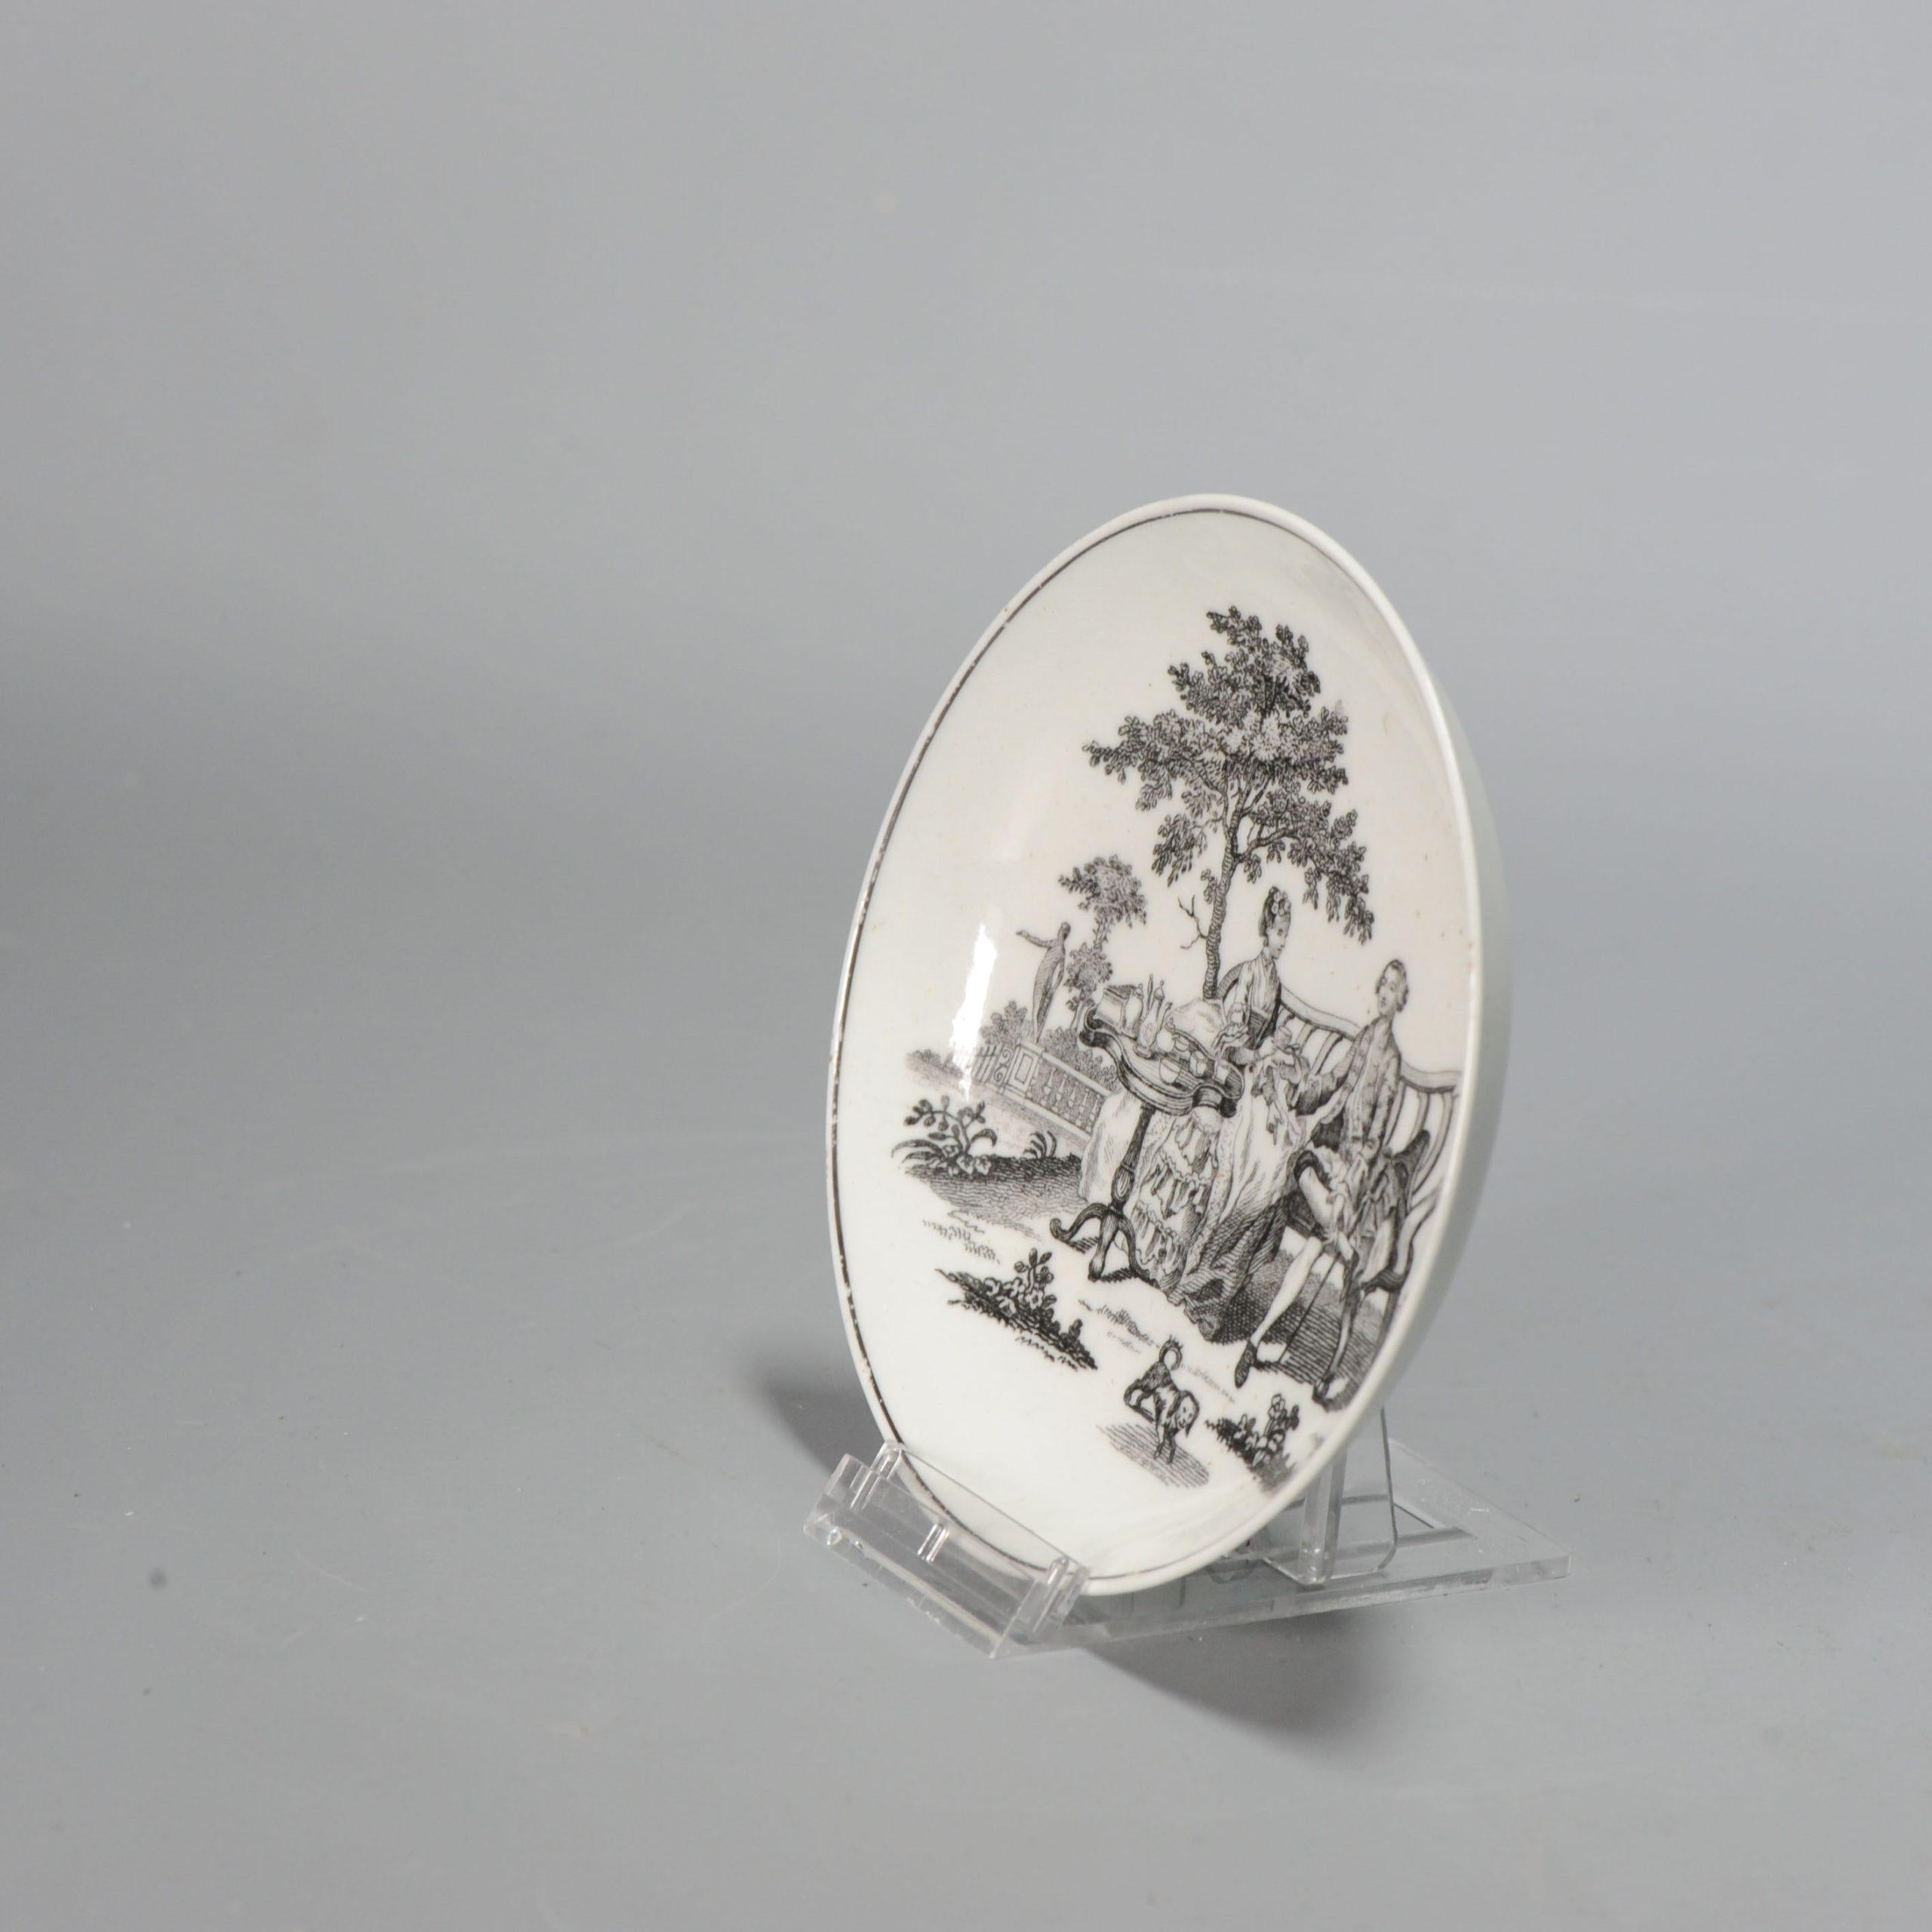 An exquisite and nicely shaped Worcester dish from the 18th century with a transfer printed design by Robert Hancock. Decorated with a version of the 'Tea Party' print.

Robert Hancock (1731-1817) Engraver

Robert Hancock was born in Badsey,